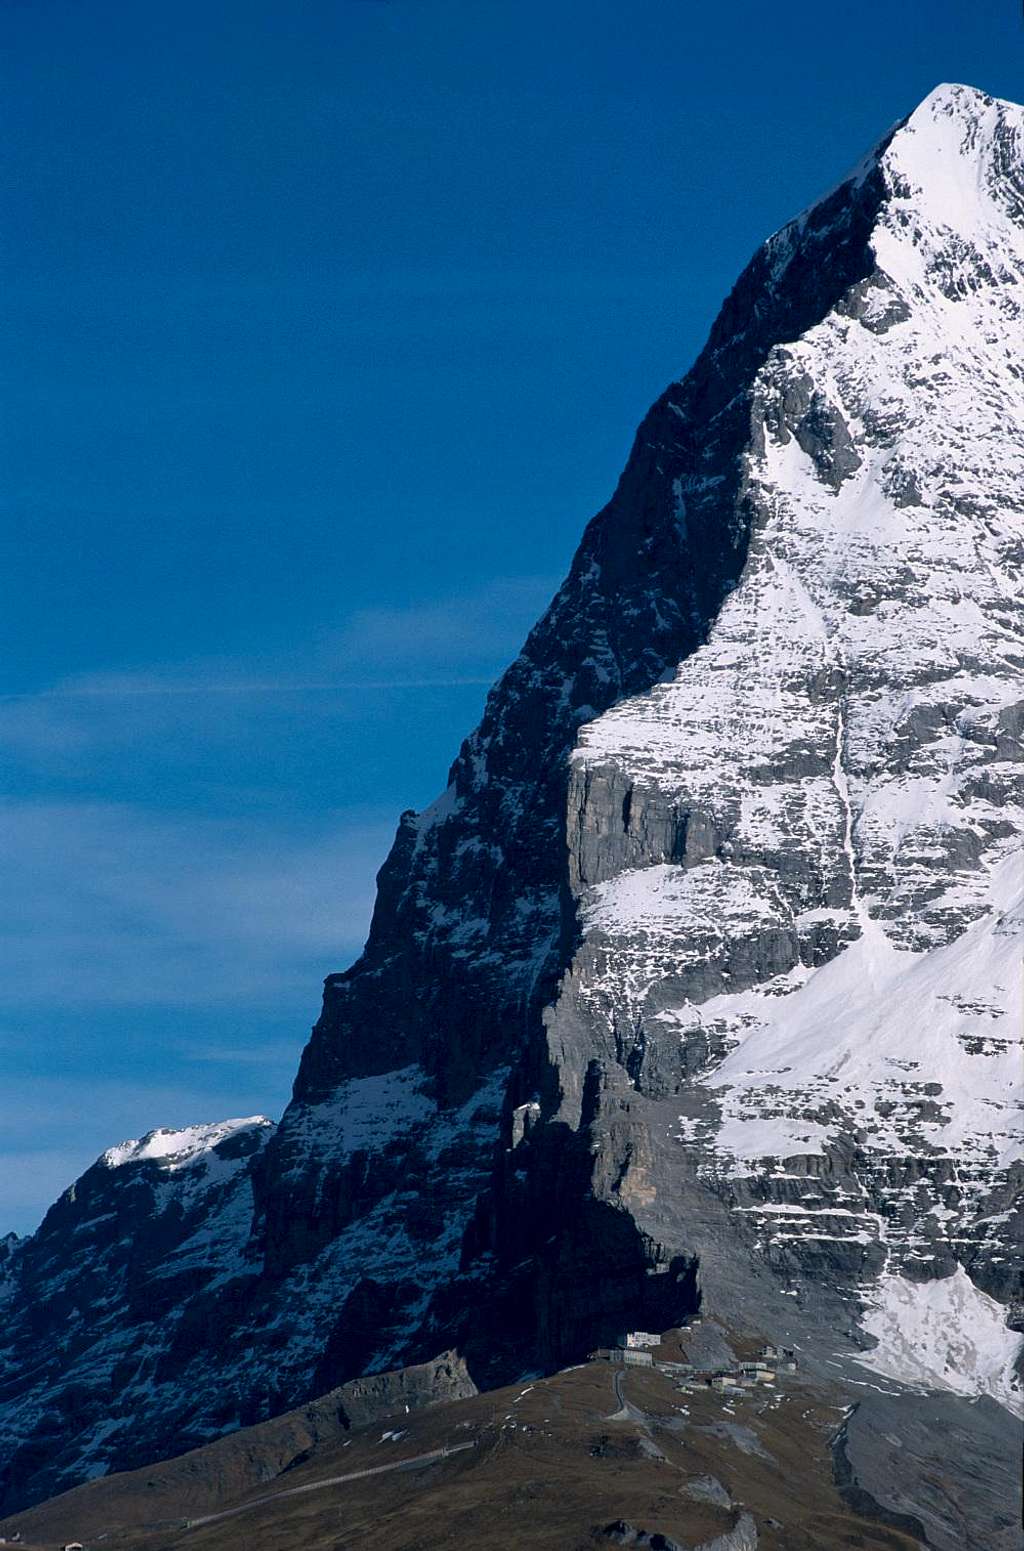 Eiger north face